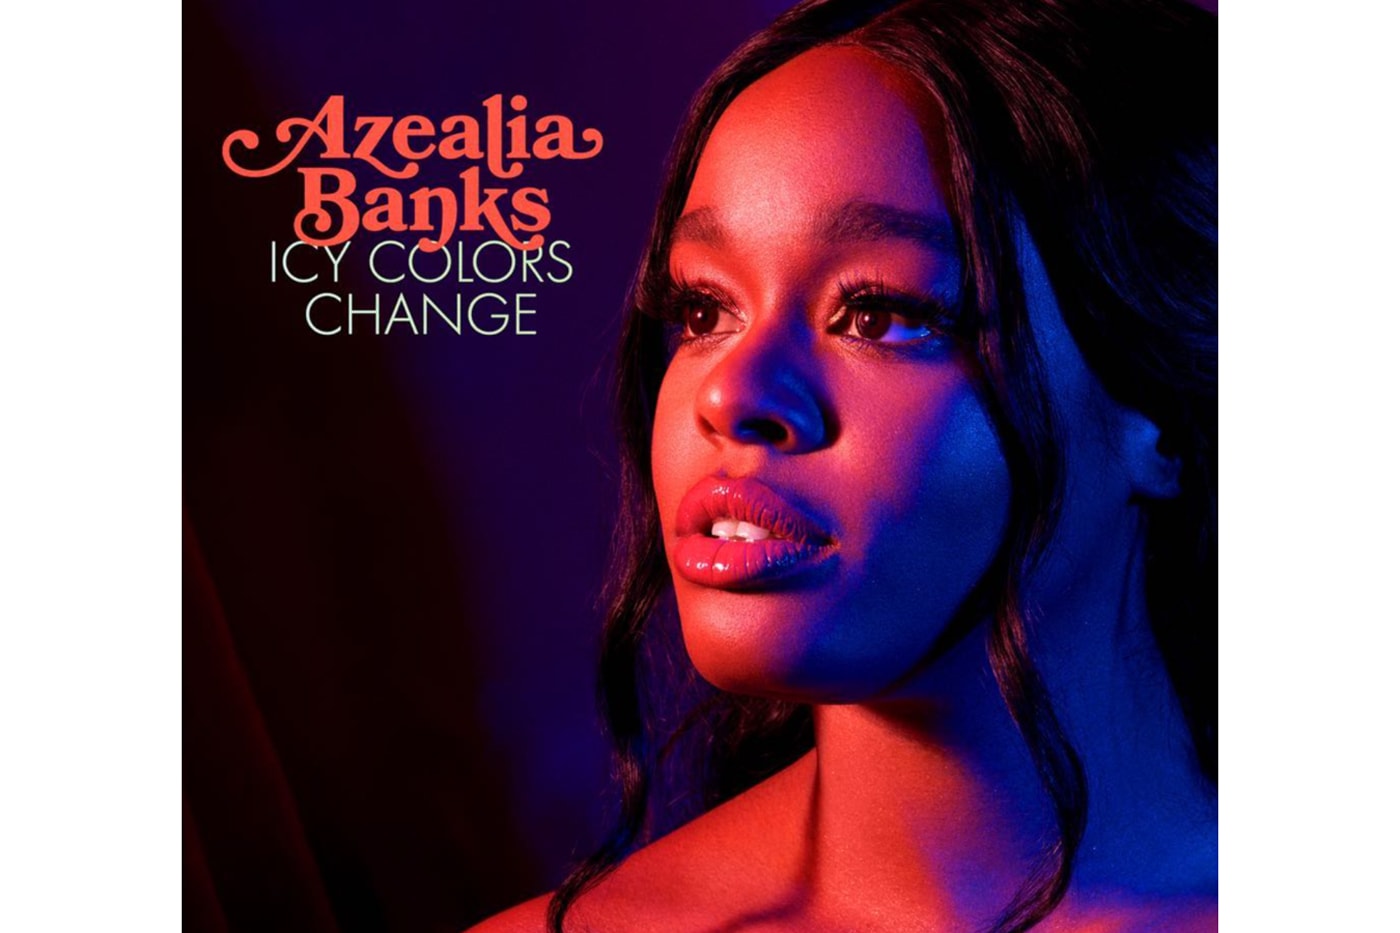 Azealia Banks Holiday-Themed EP Icy Colors Change Christmas Have Yourself a Merry Little Christmas